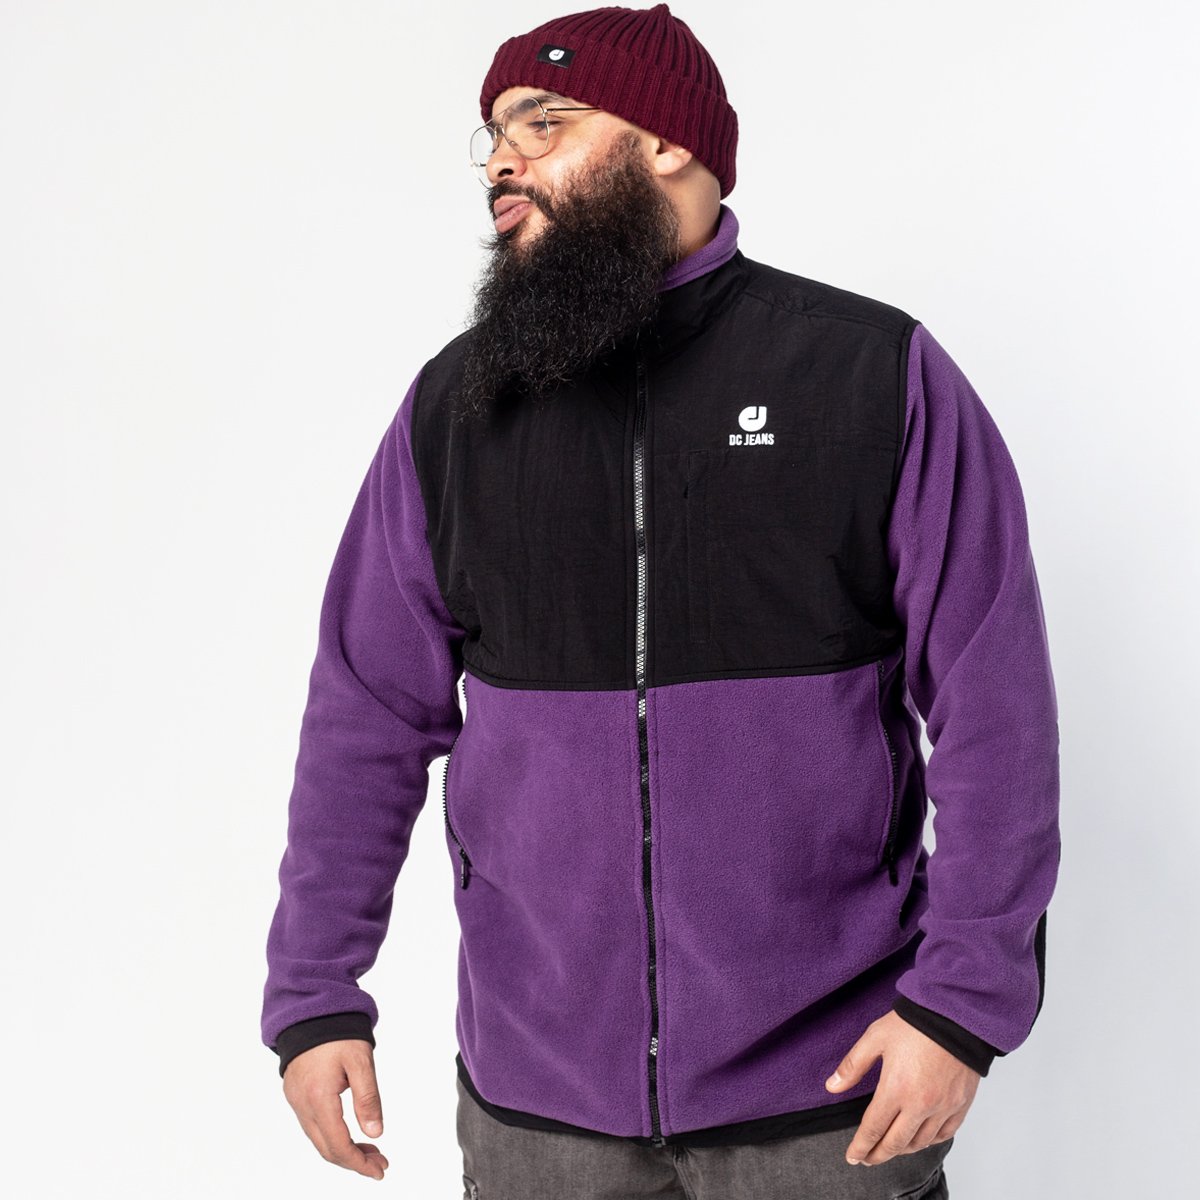 Veste Polaire Purple - DCjeans saroual and clothing